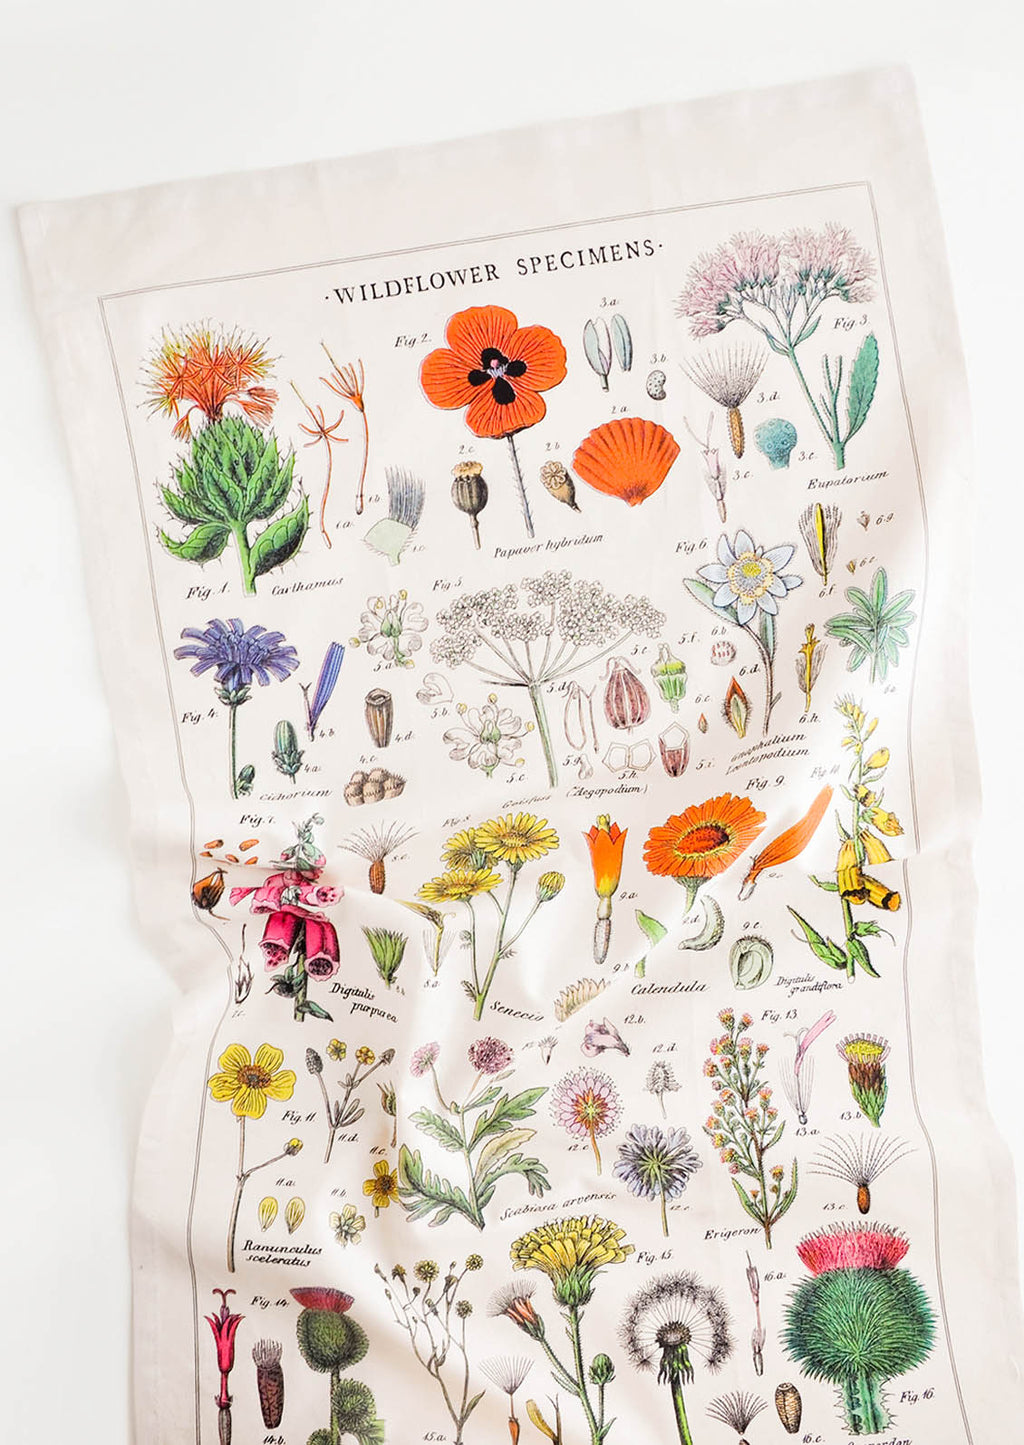 1: A cotton tea towel with botanical wildflower species printed in color.